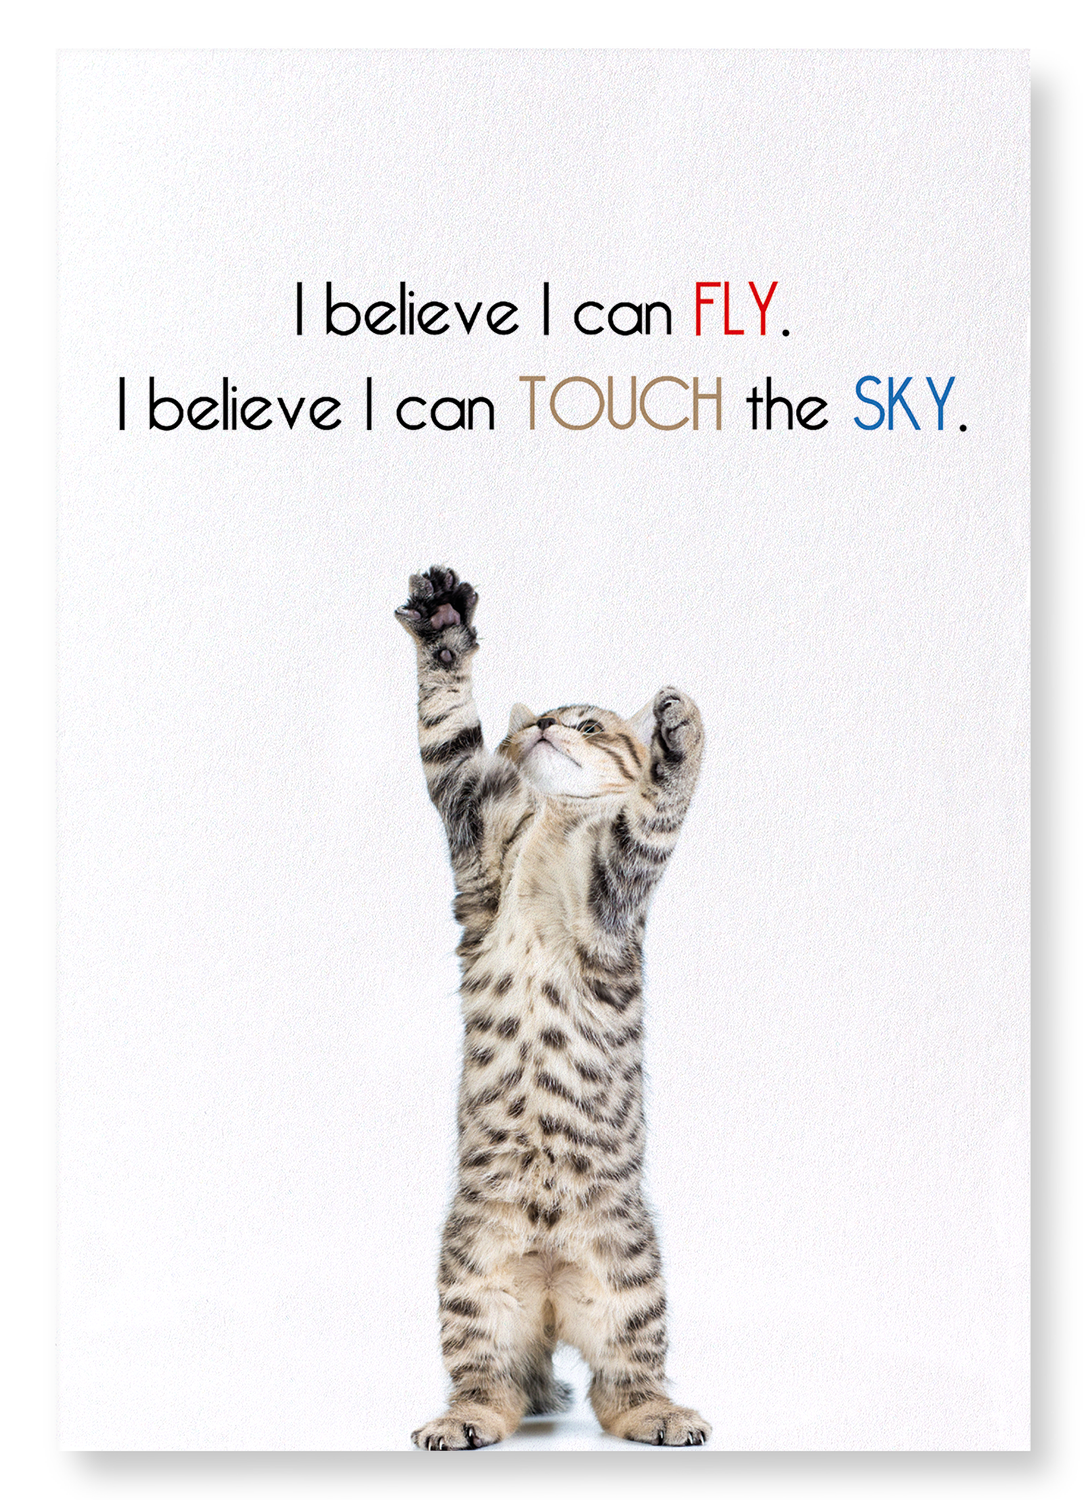 I BELIEVE I CAN FLY: Funny Animal Art print